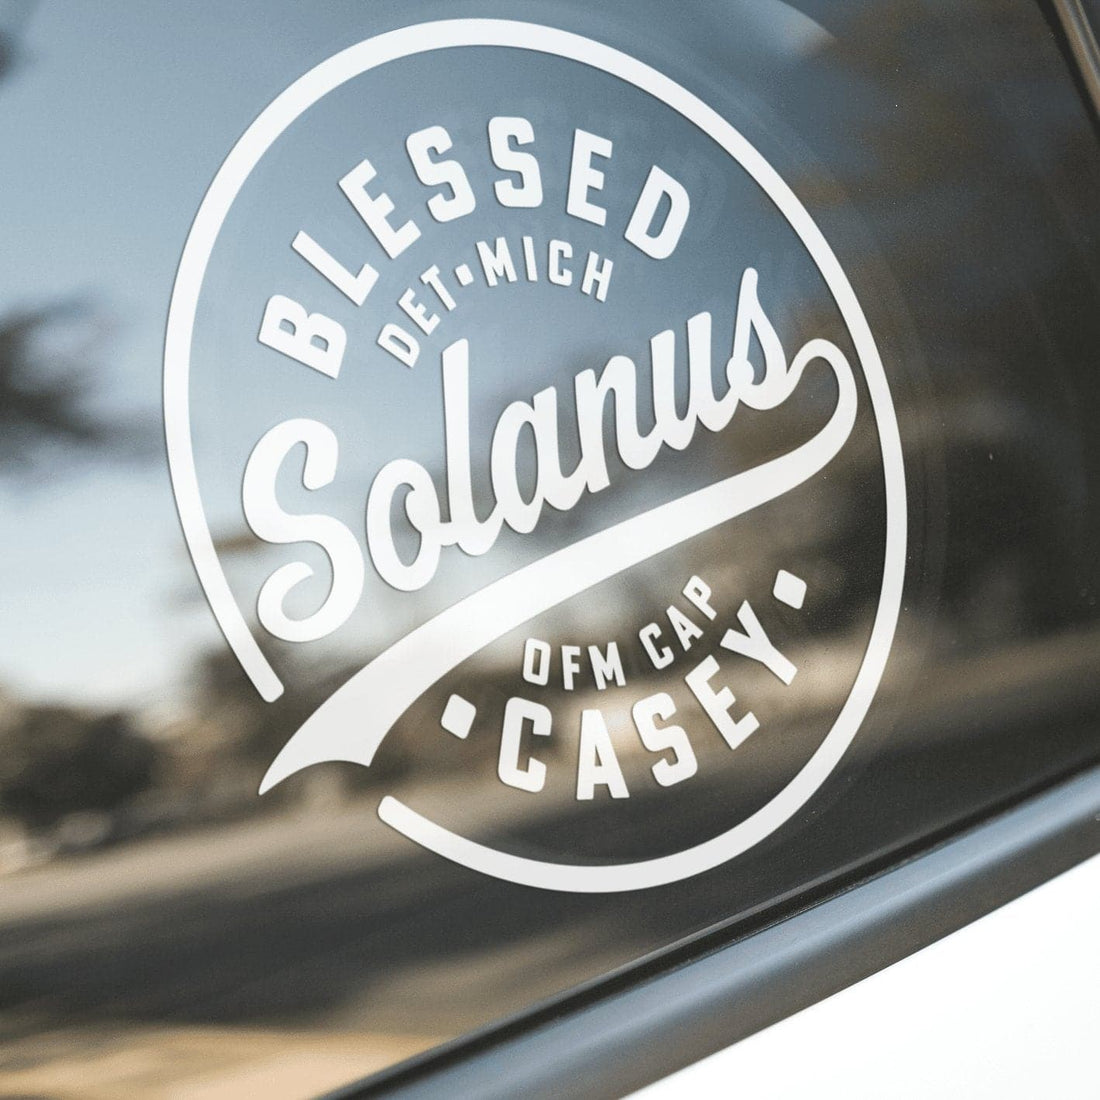 Blessed Solanus Casey Catholic Car Decal - Little Way Design Co.